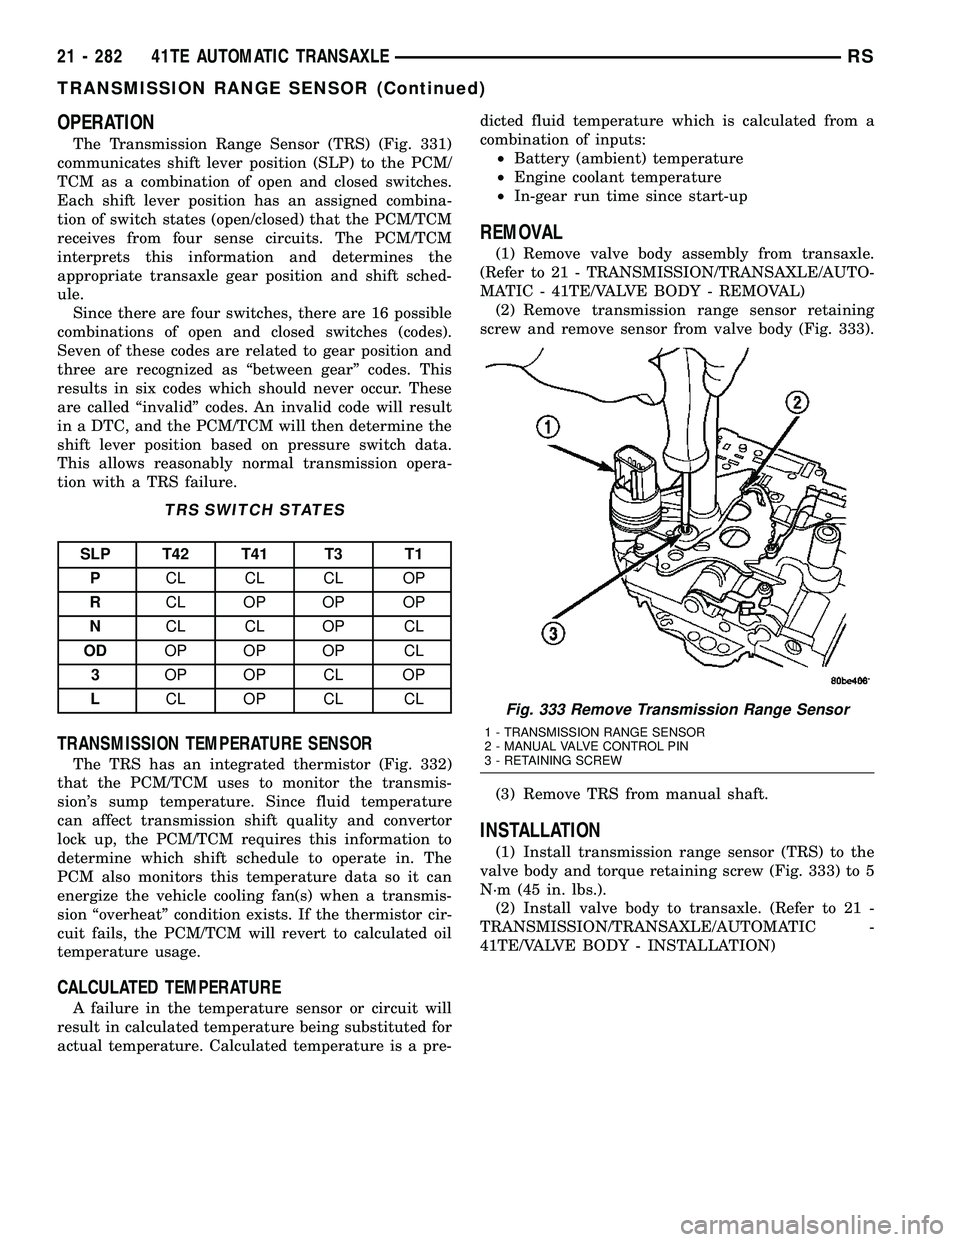 CHRYSLER VOYAGER 2005  Service Manual OPERATION
The Transmission Range Sensor (TRS) (Fig. 331)
communicates shift lever position (SLP) to the PCM/
TCM as a combination of open and closed switches.
Each shift lever position has an assigned